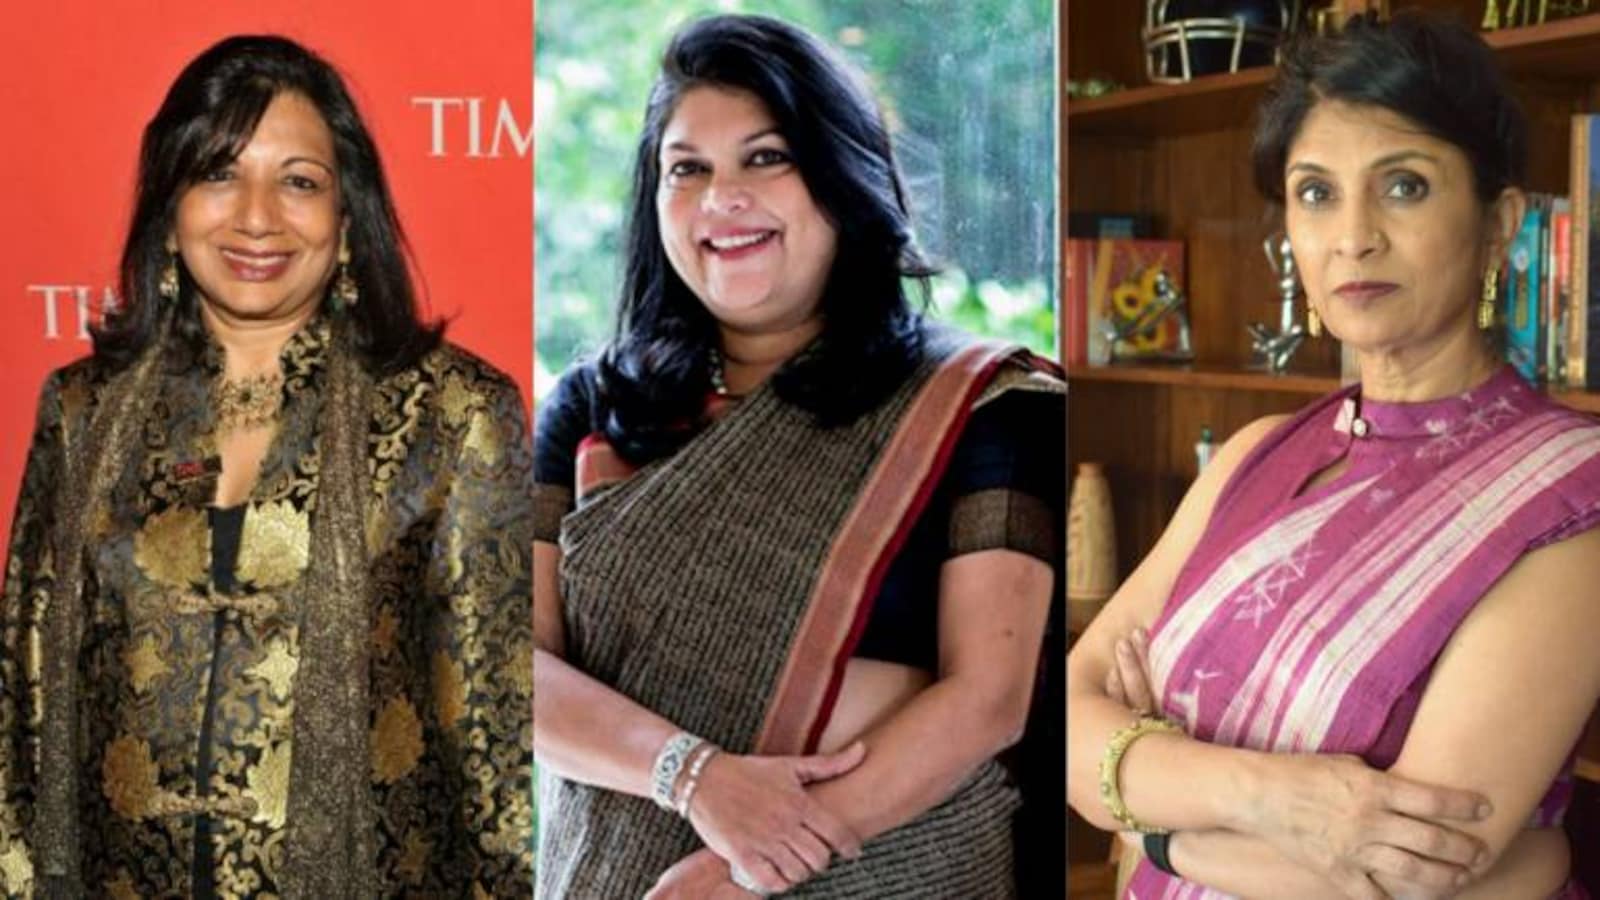 8 Women Entrepreneurs Under 30 to Watch in 2021, Nominated by Leaders